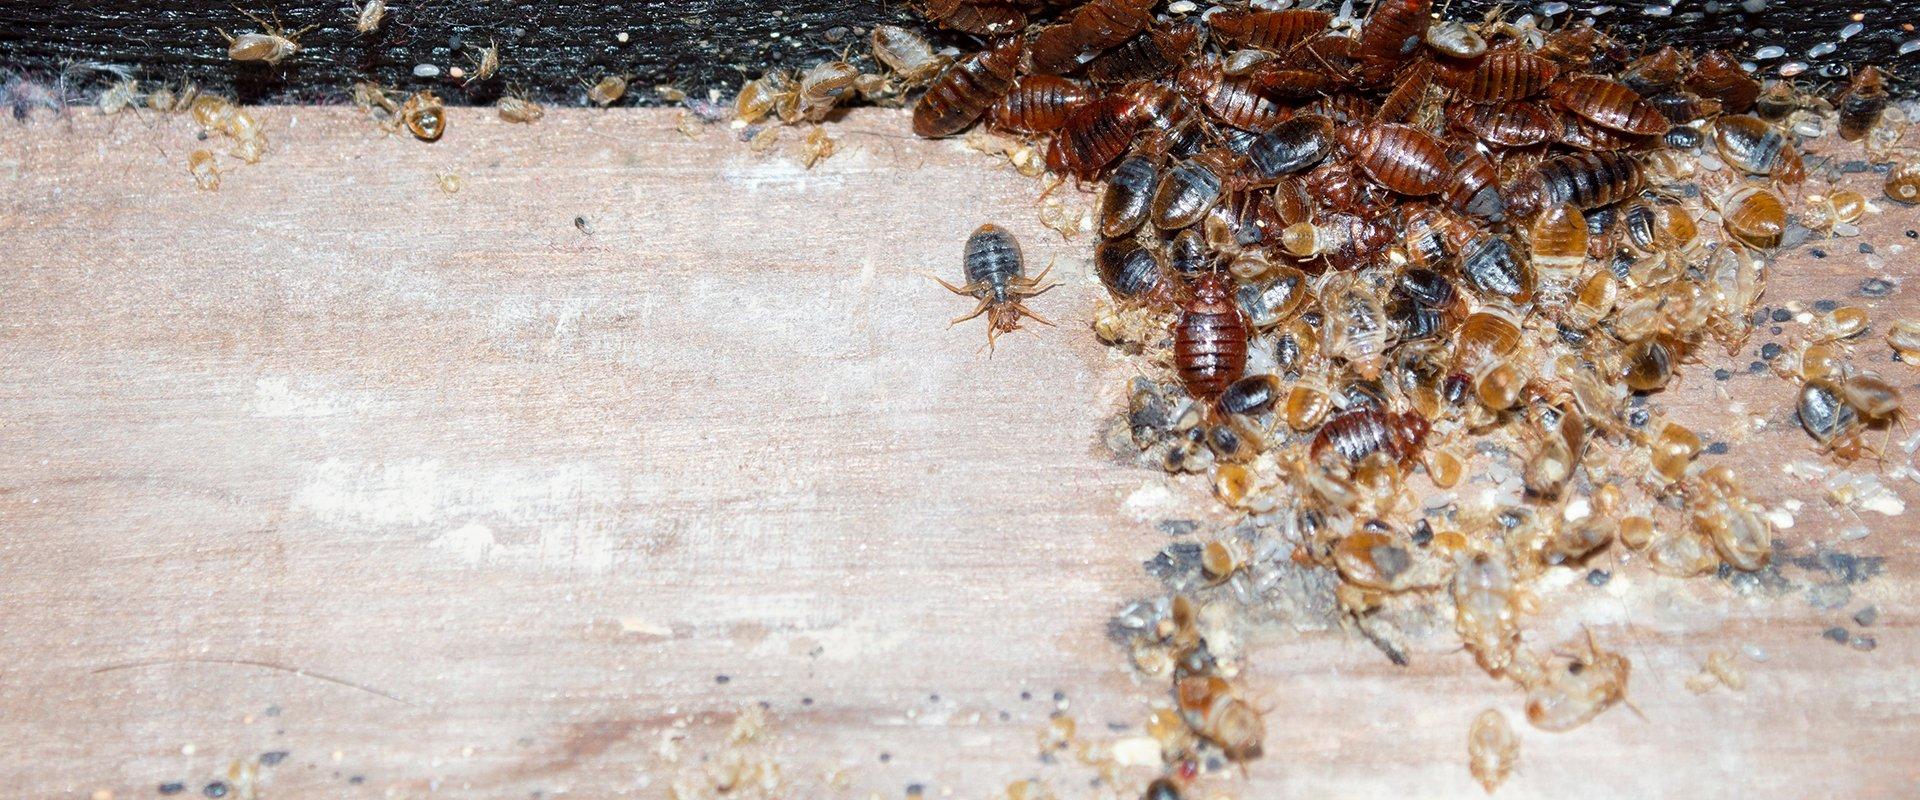 bed bugs on a box spring